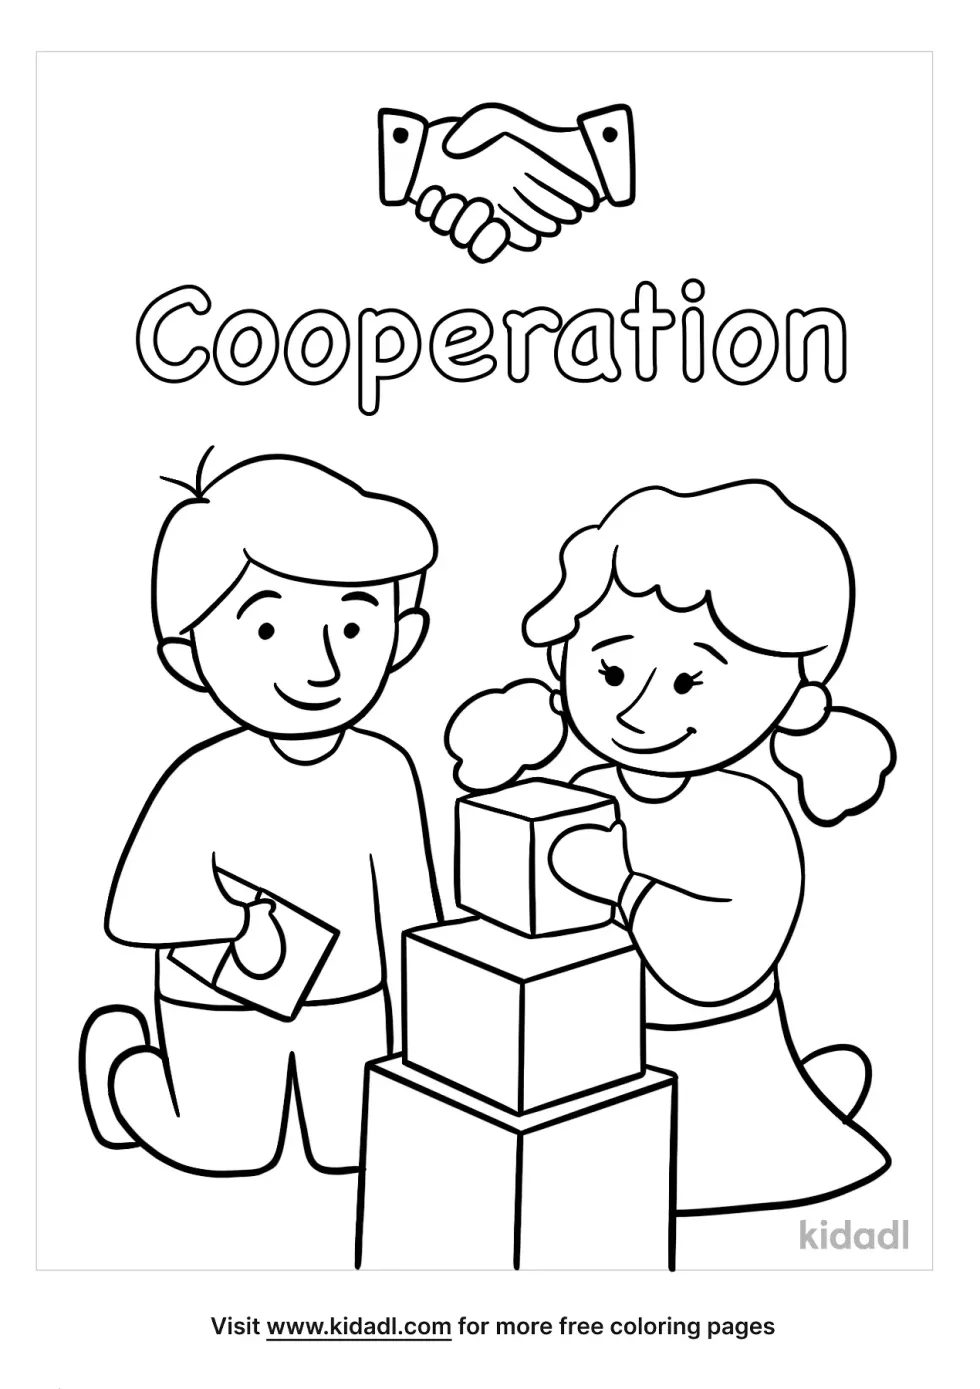 Cooperation Coloring Page